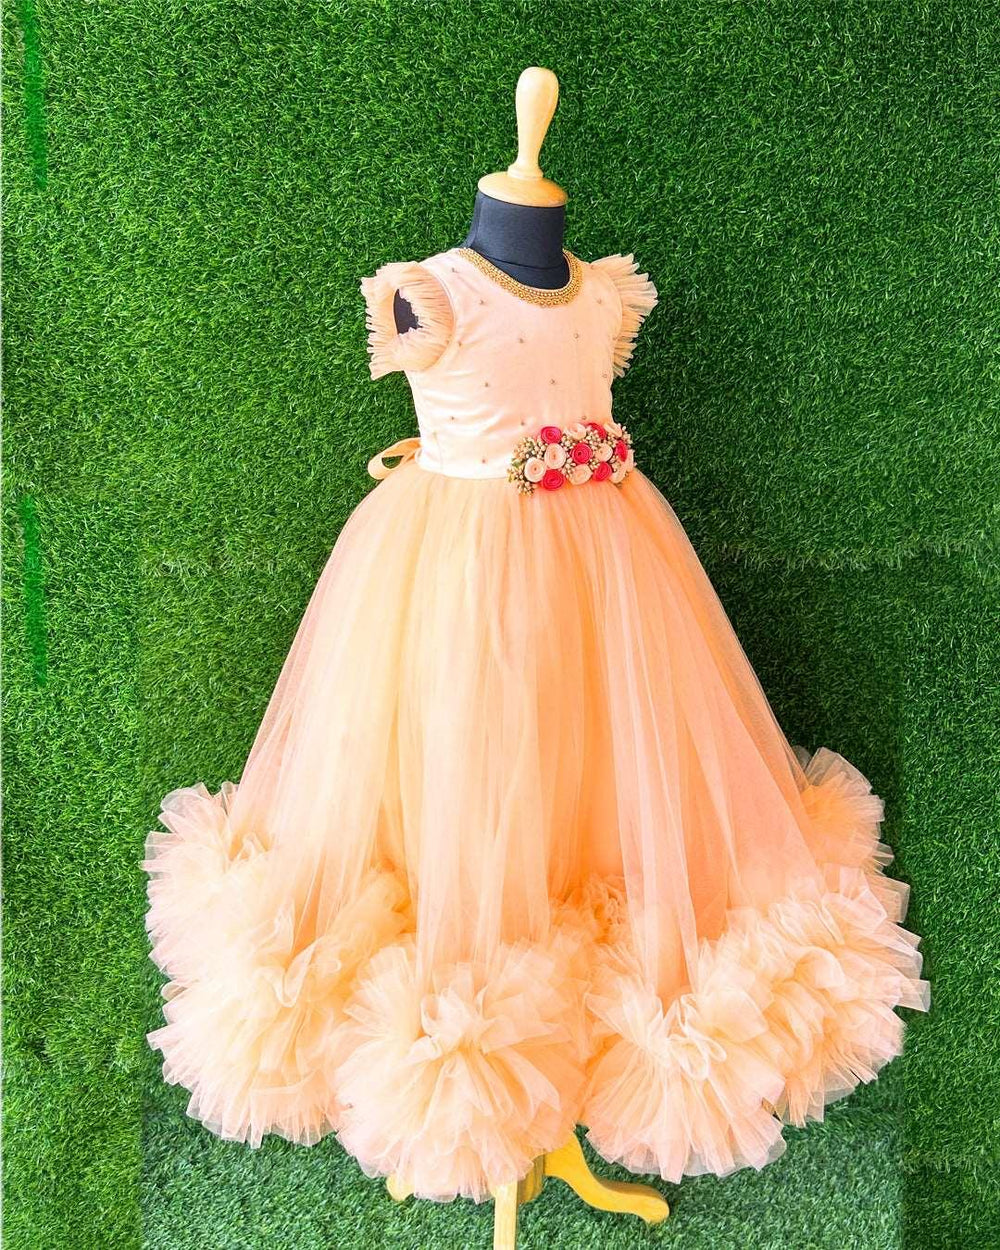 Light Peach Hand Embroidery Flower Gown- Matching Hair Band.
Material : Light Peach Colour long Gown. Light peach colour net is the main material of the gown.Golden beaded hand work is done on the neck portion and beads sprea